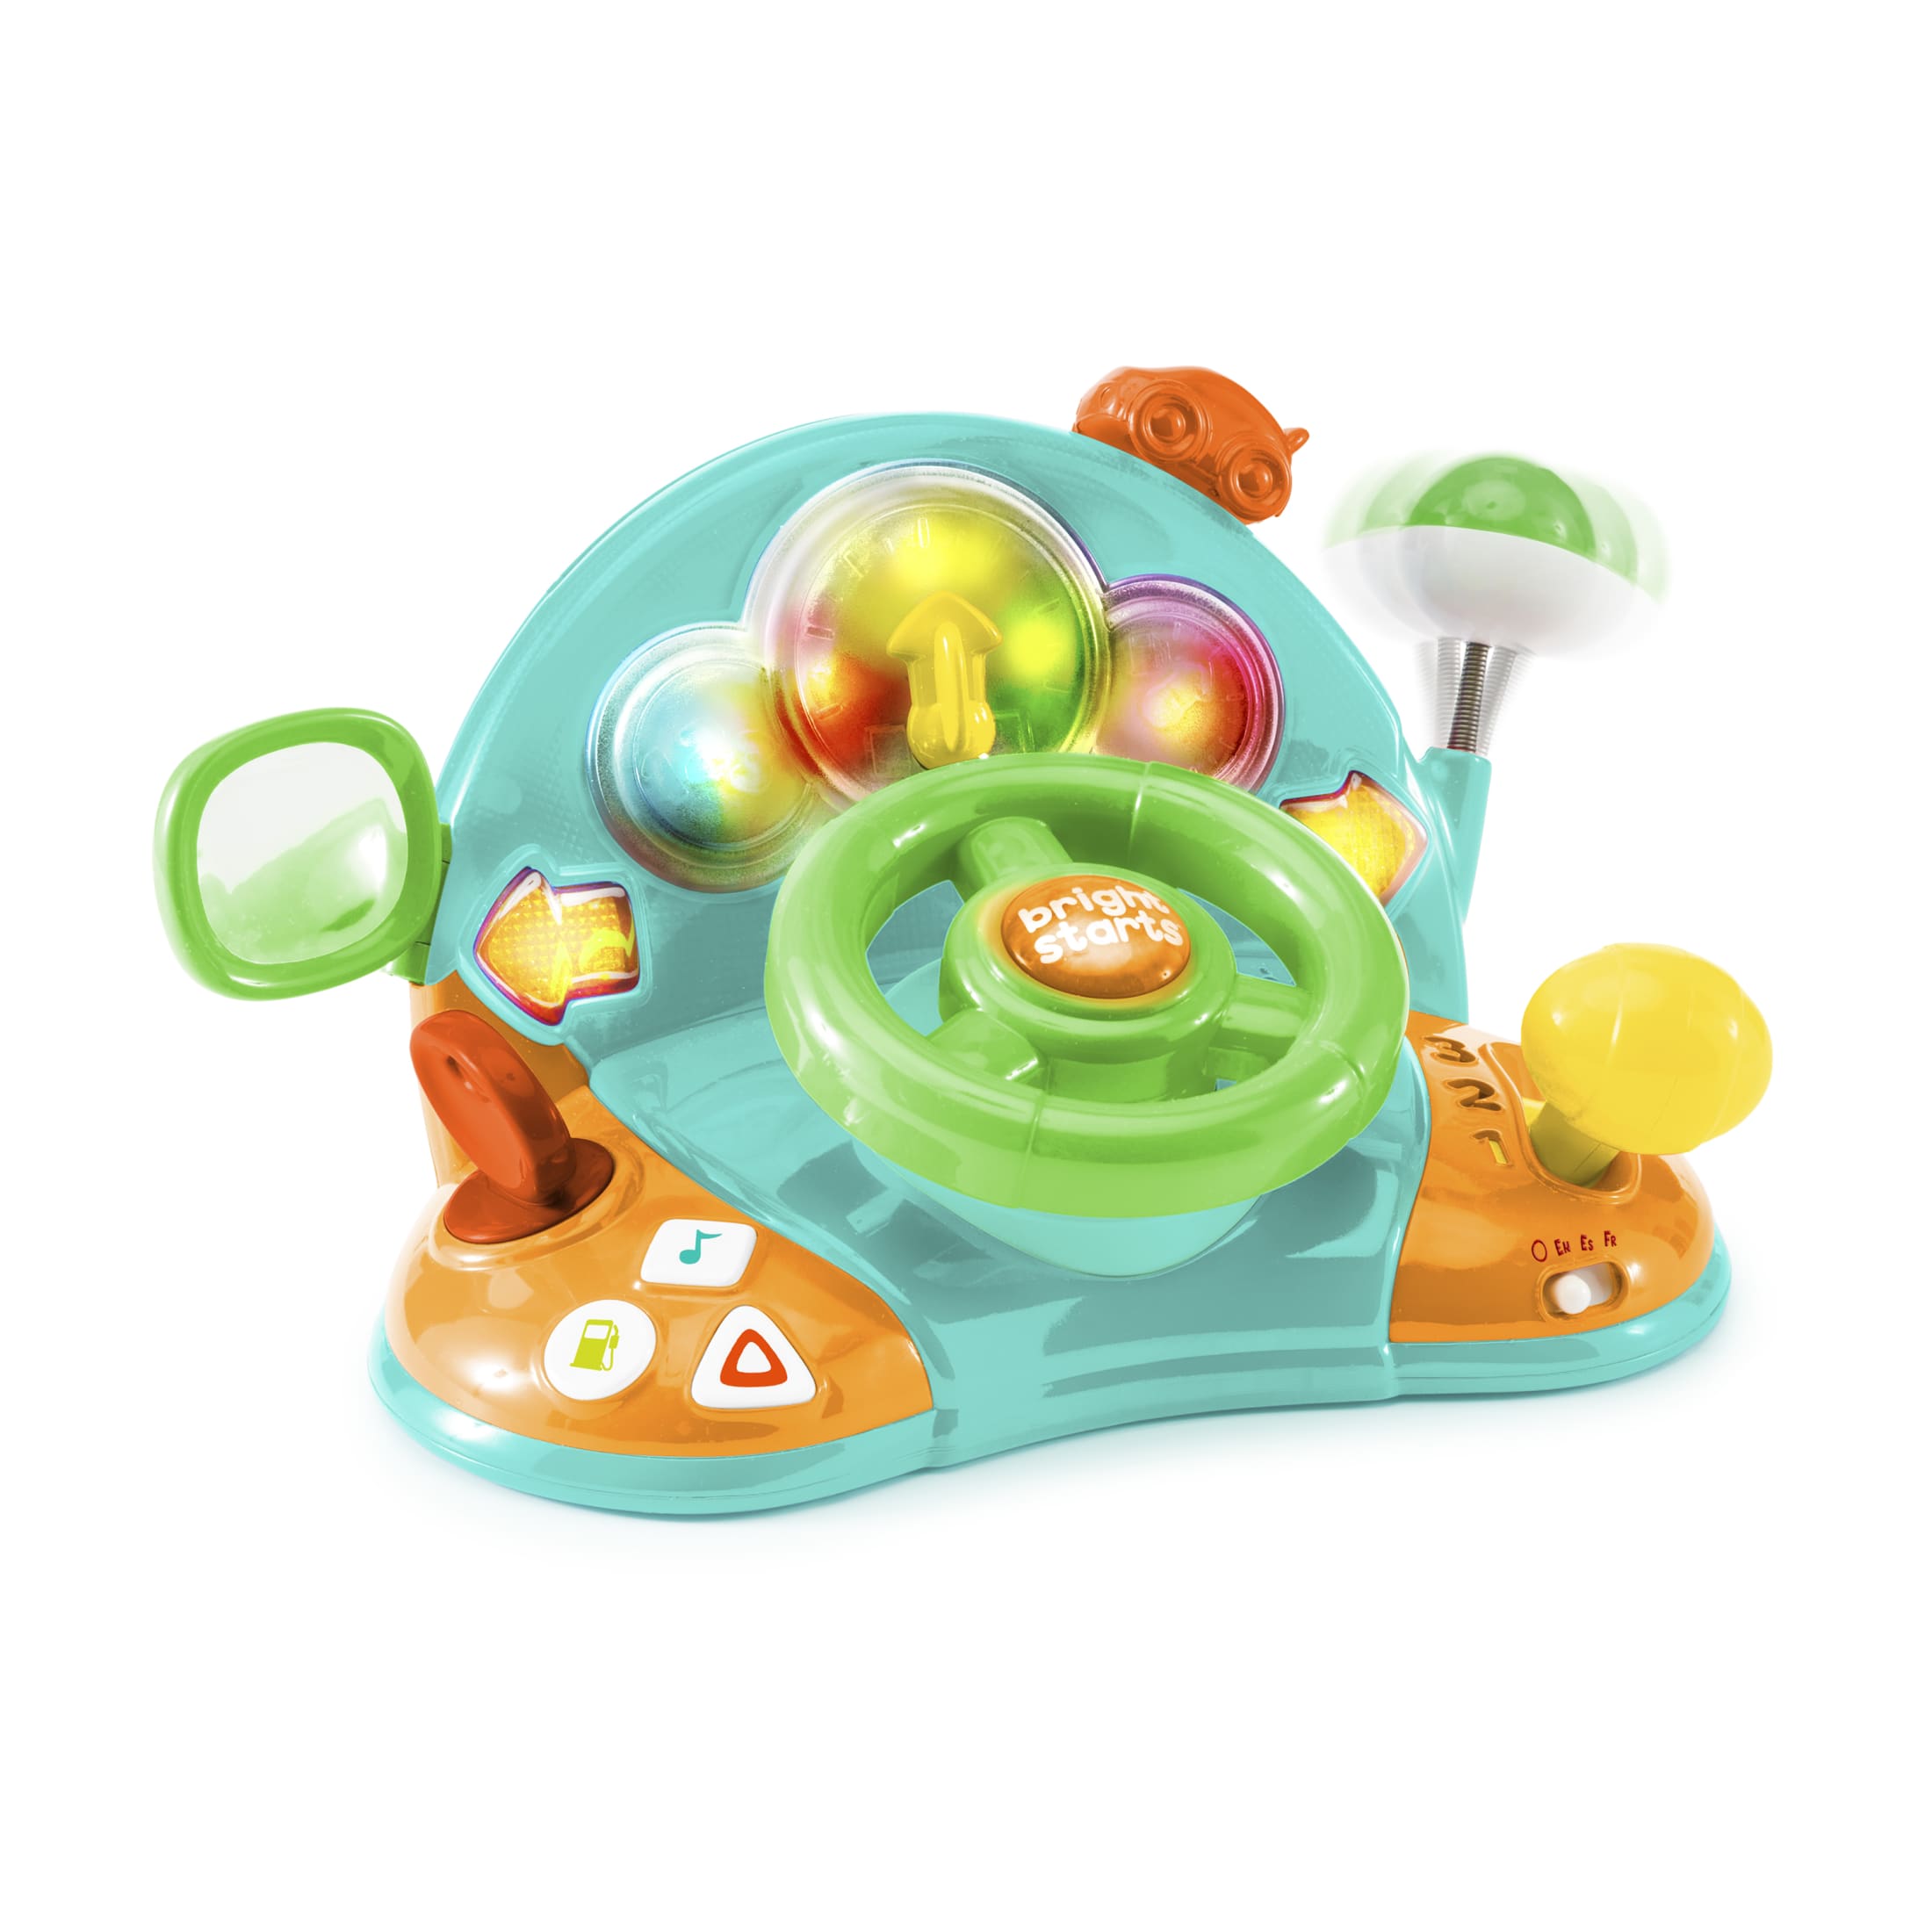 Bright Starts Lights & Colors Driver Electronic Learning Toy with Melodies, Ages 6 Months + - image 1 of 18